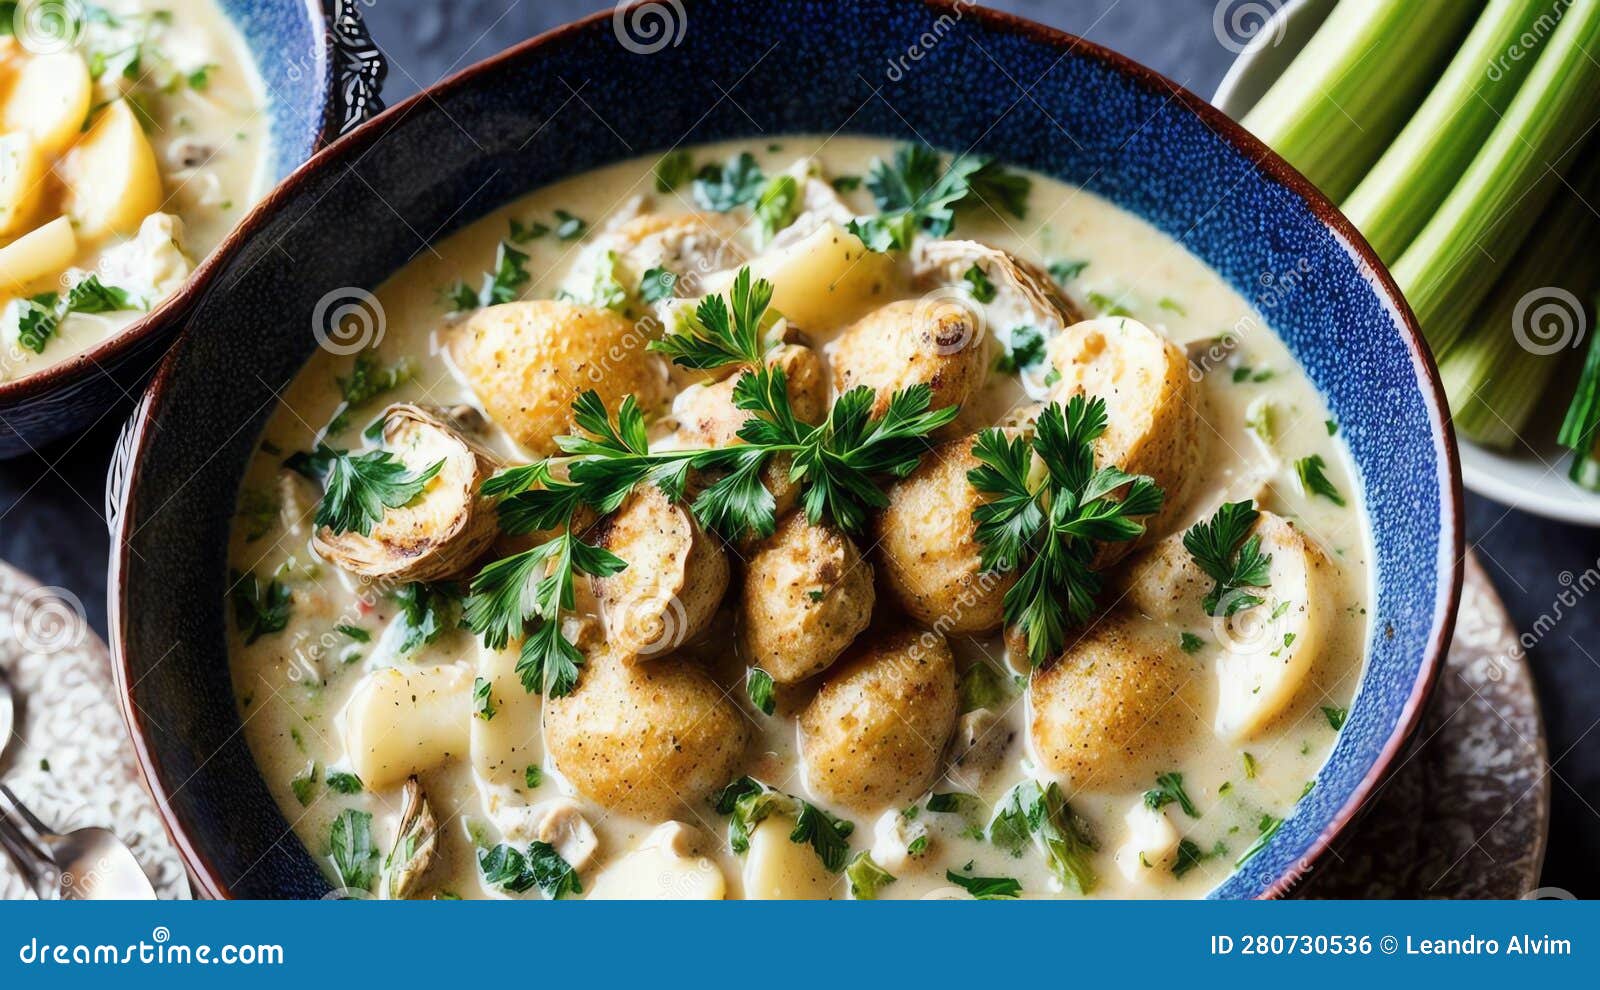 Paula Deen S Creamy Oyster Stew a Cozy and Hearty Seafood Delight.AI ...